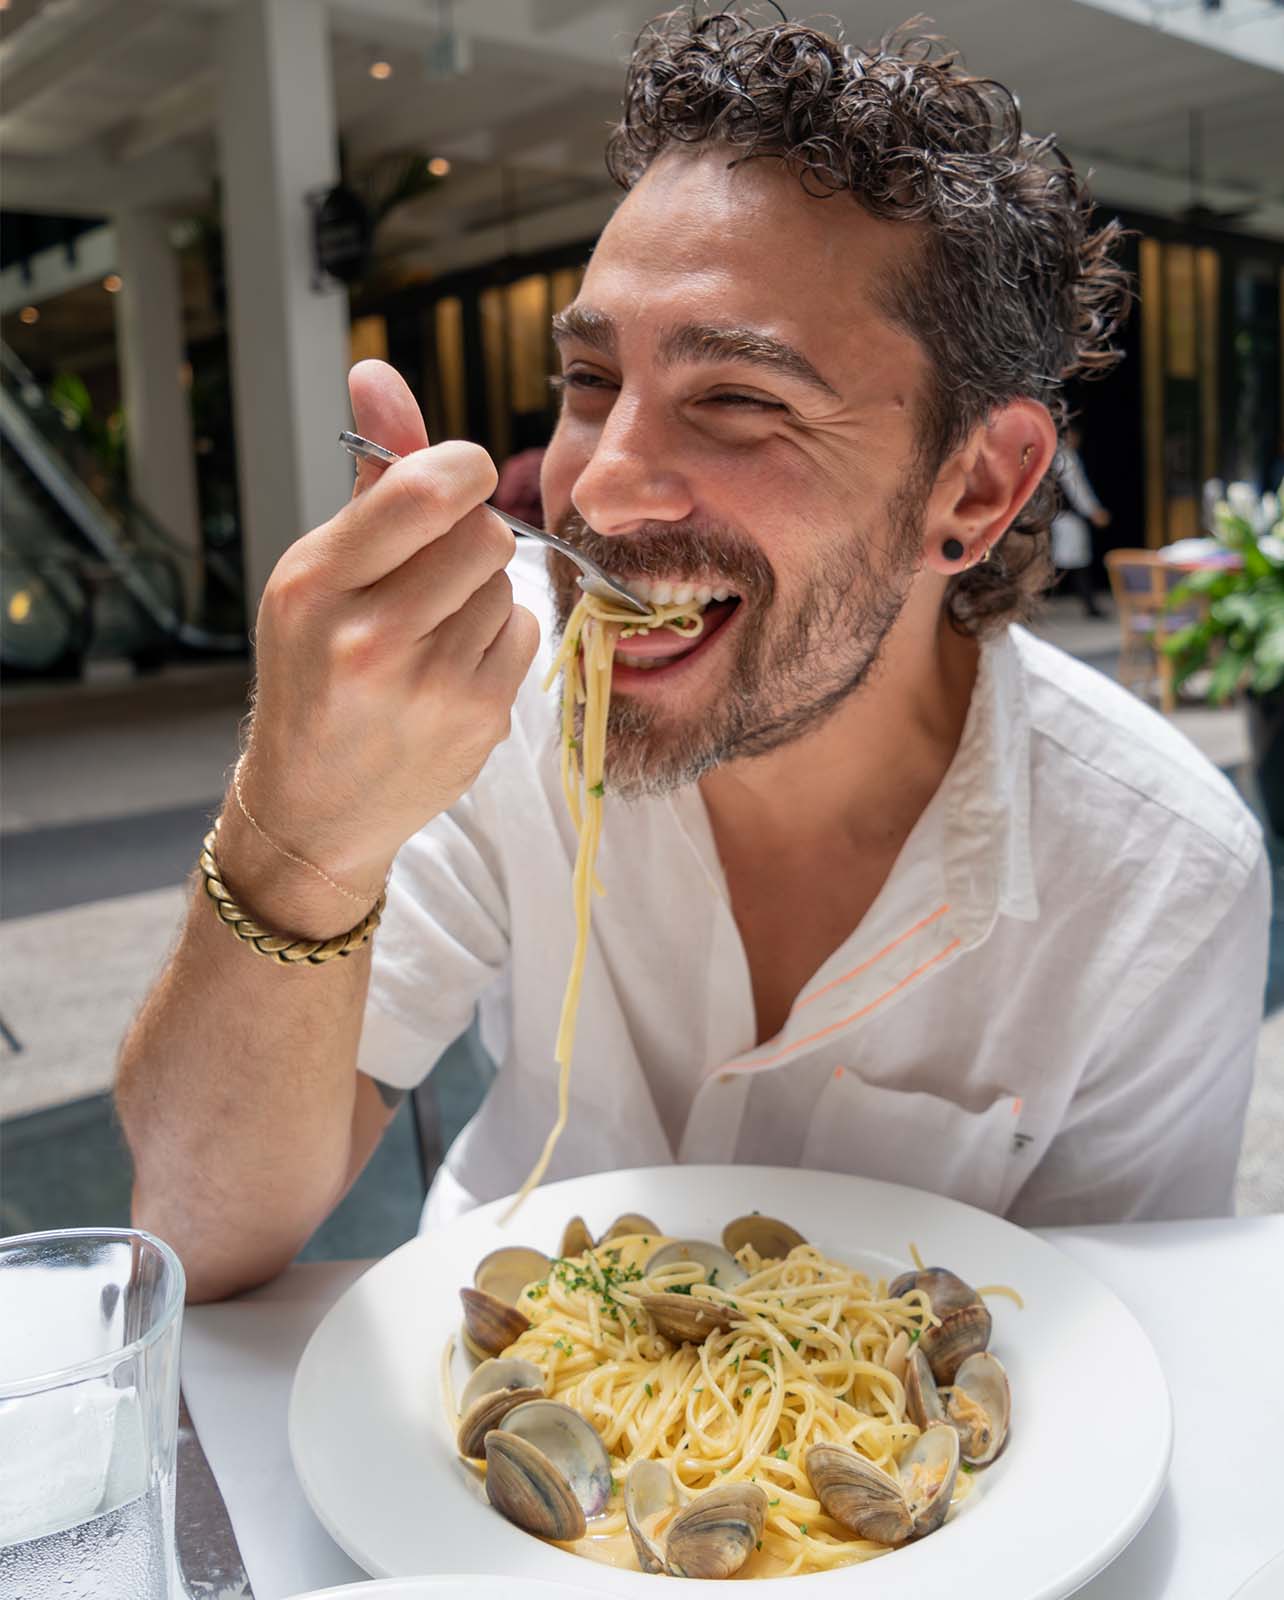 Man smiles while eating a bite of pasta